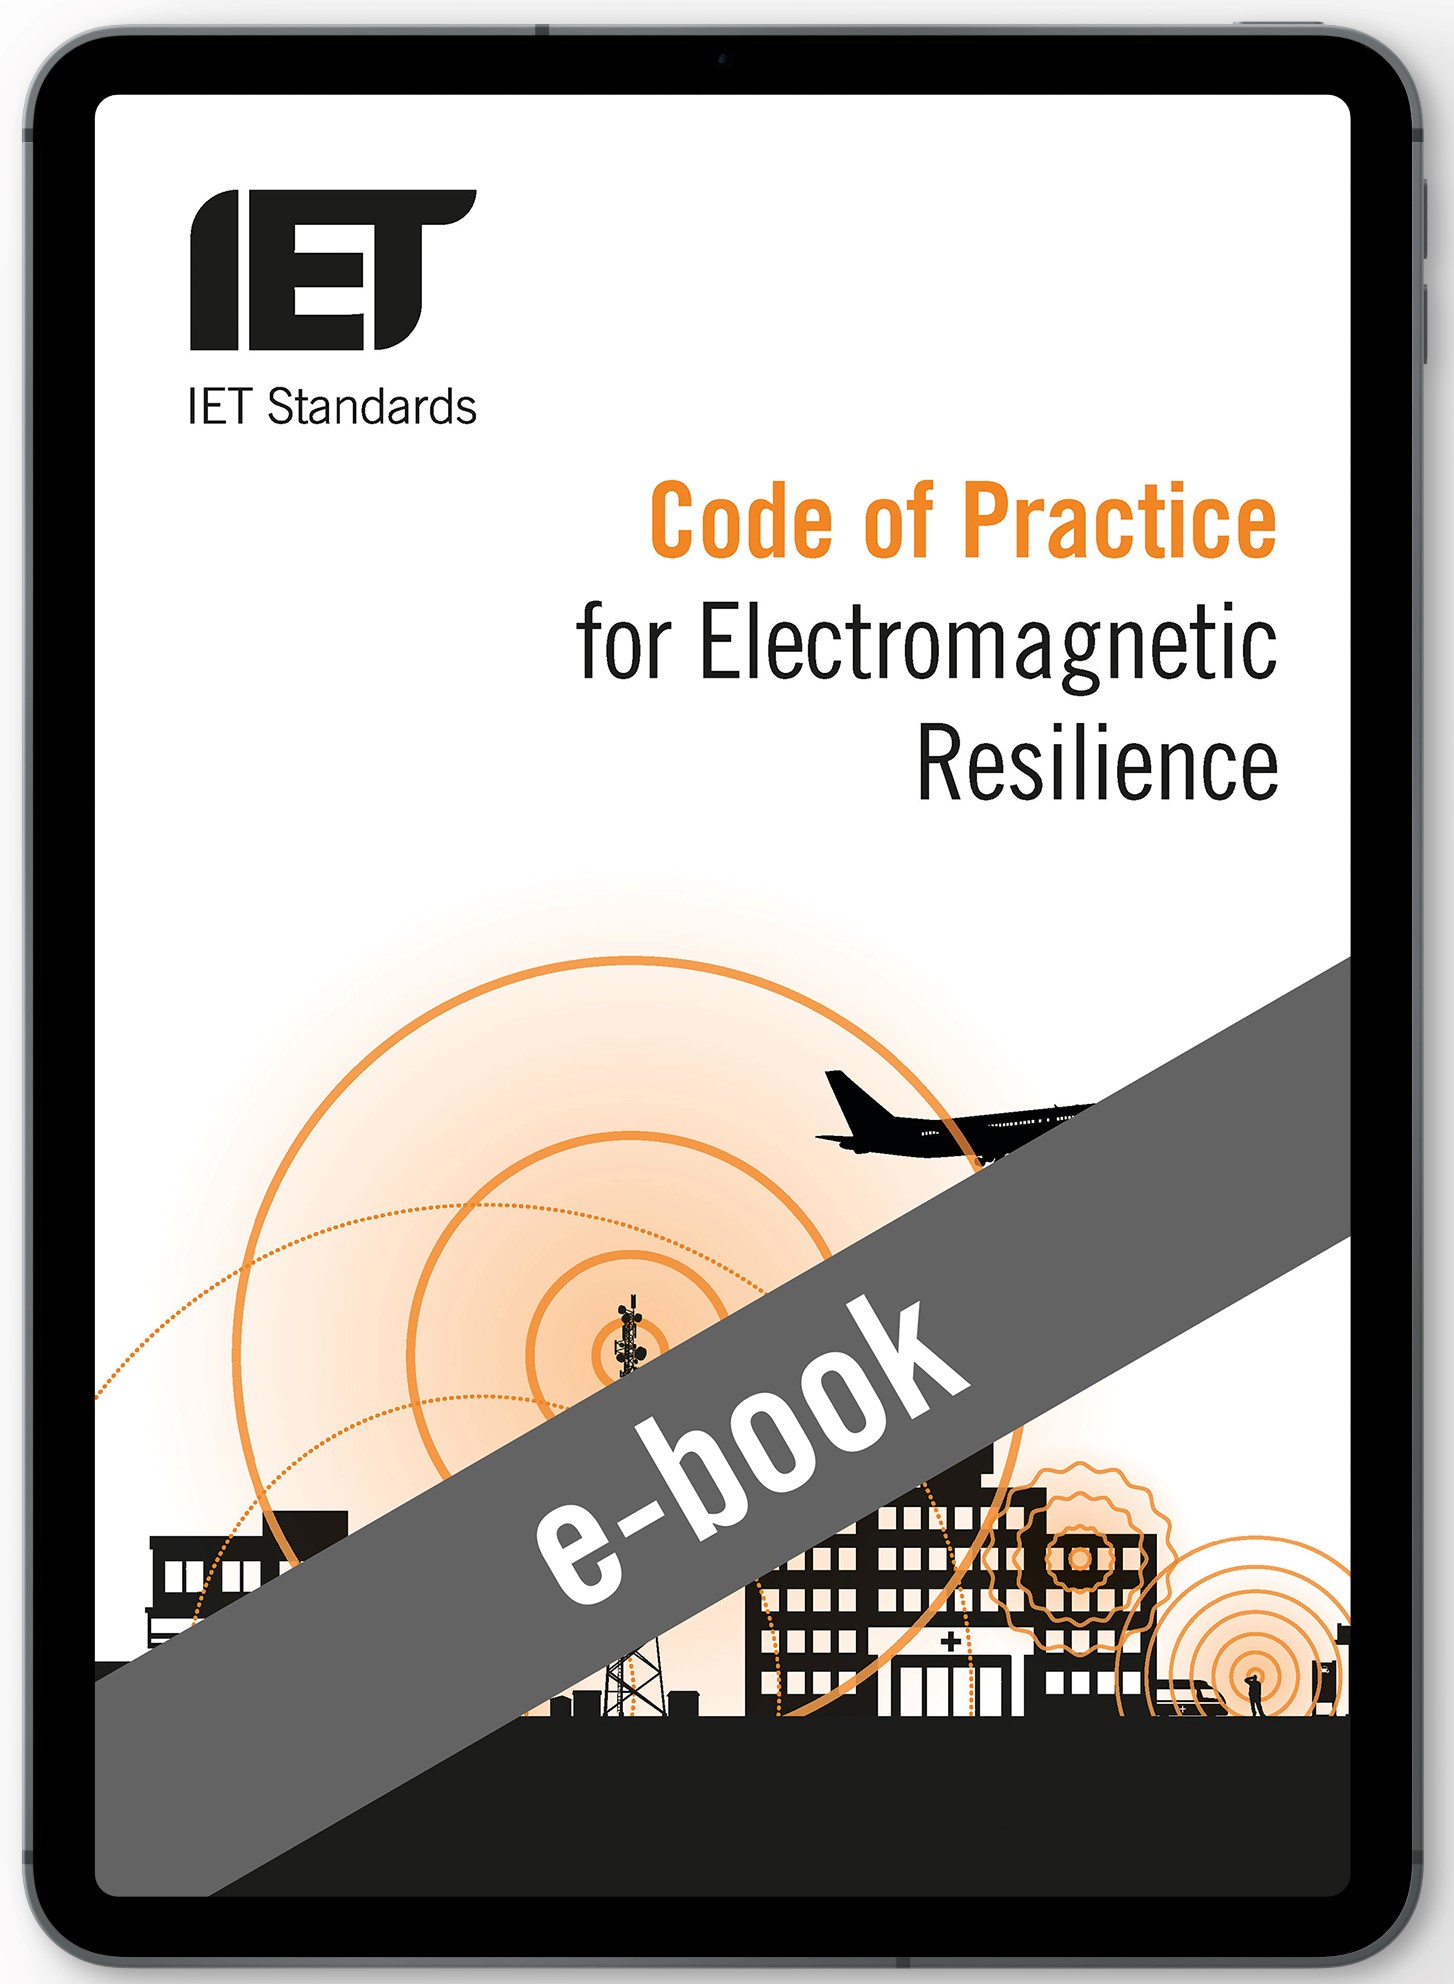 CoP for Electromagnetic Resilience (VS)